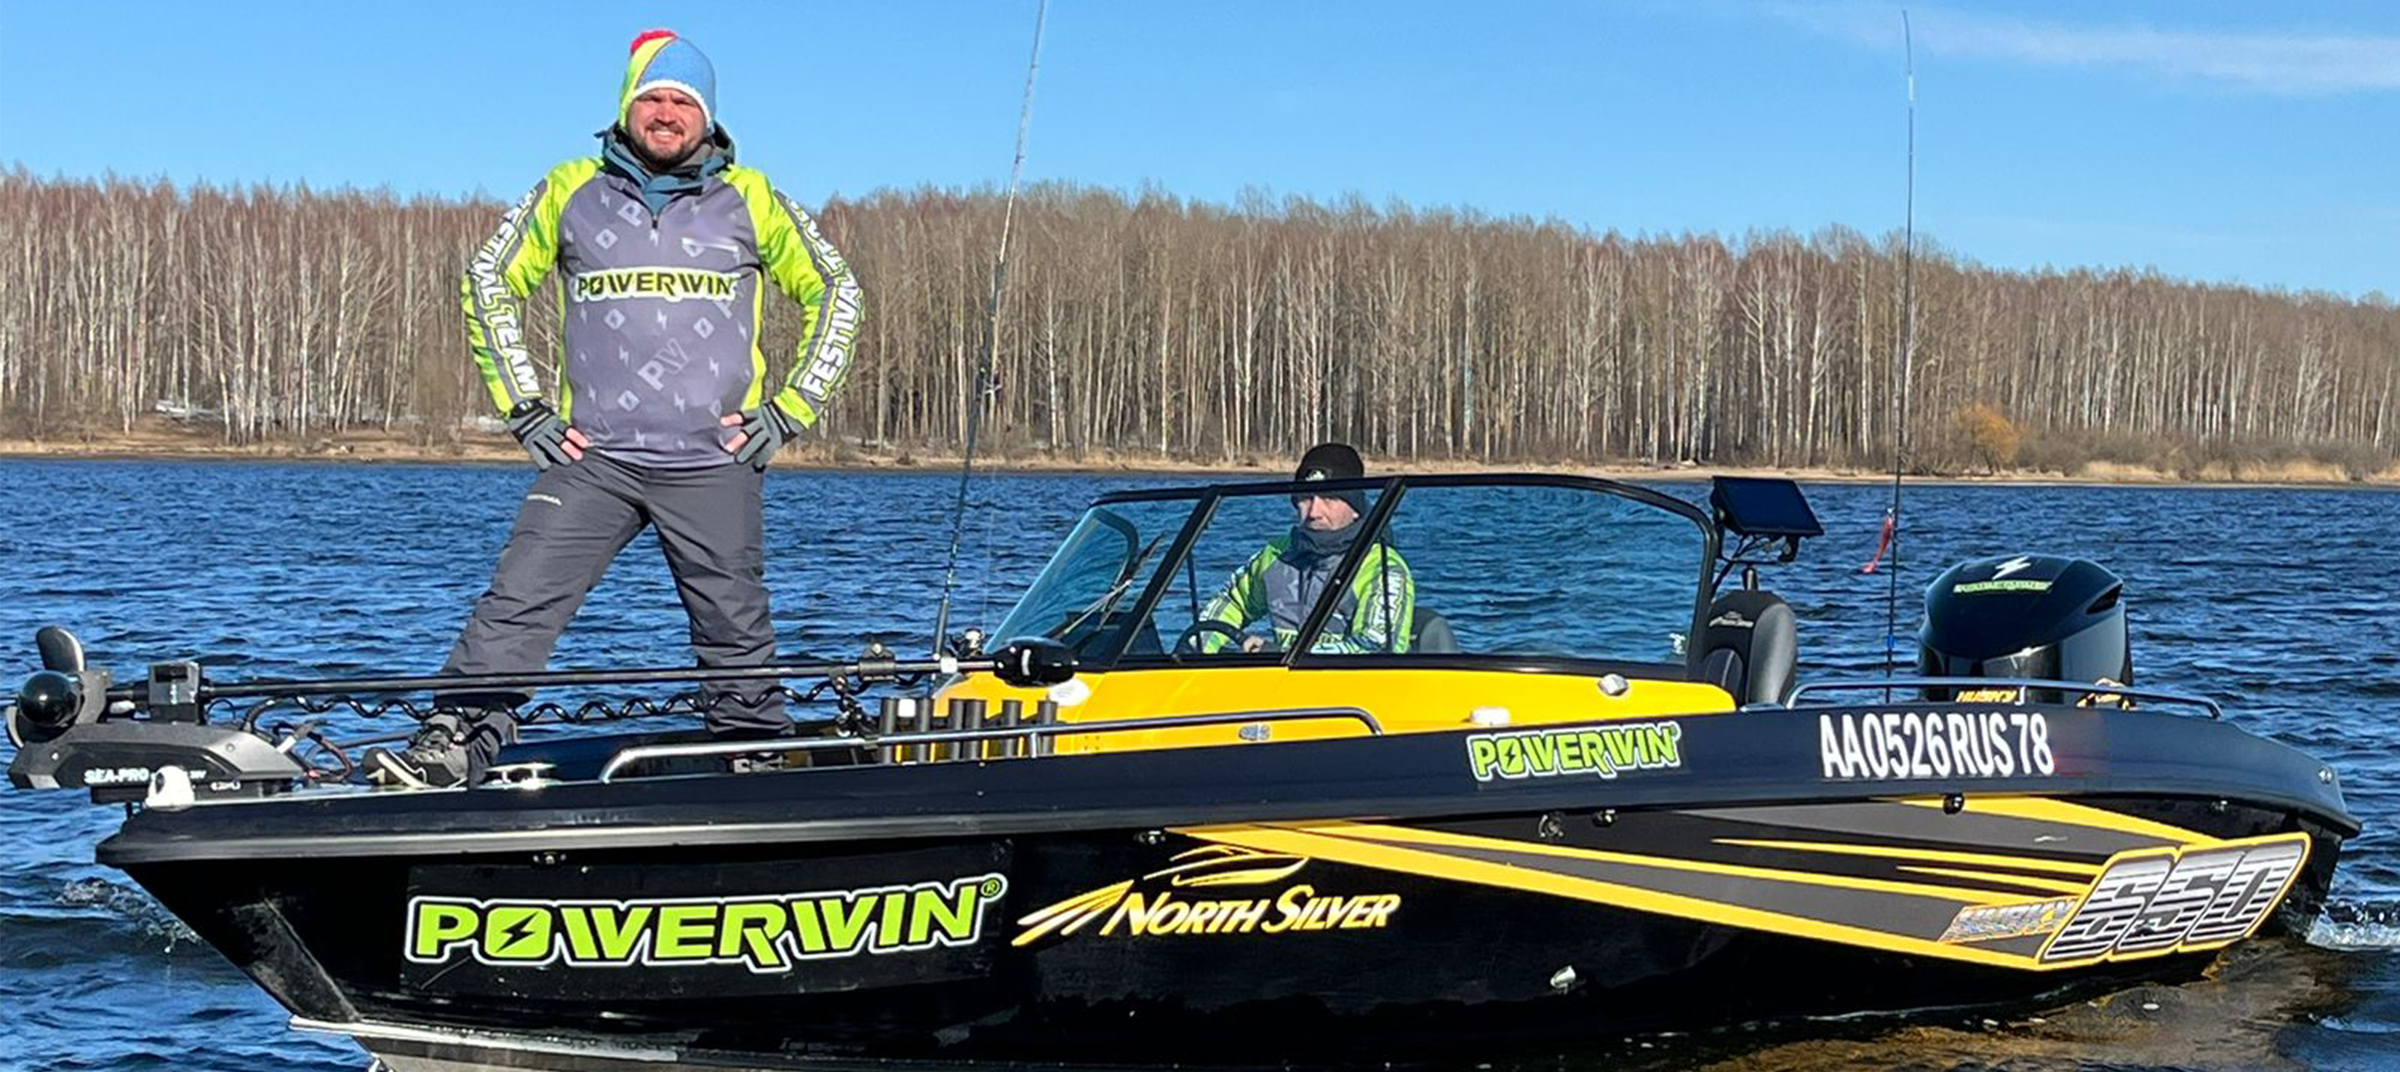 POWERWIN Energizes the Waters: Proud Sponsors of a Fishing Team